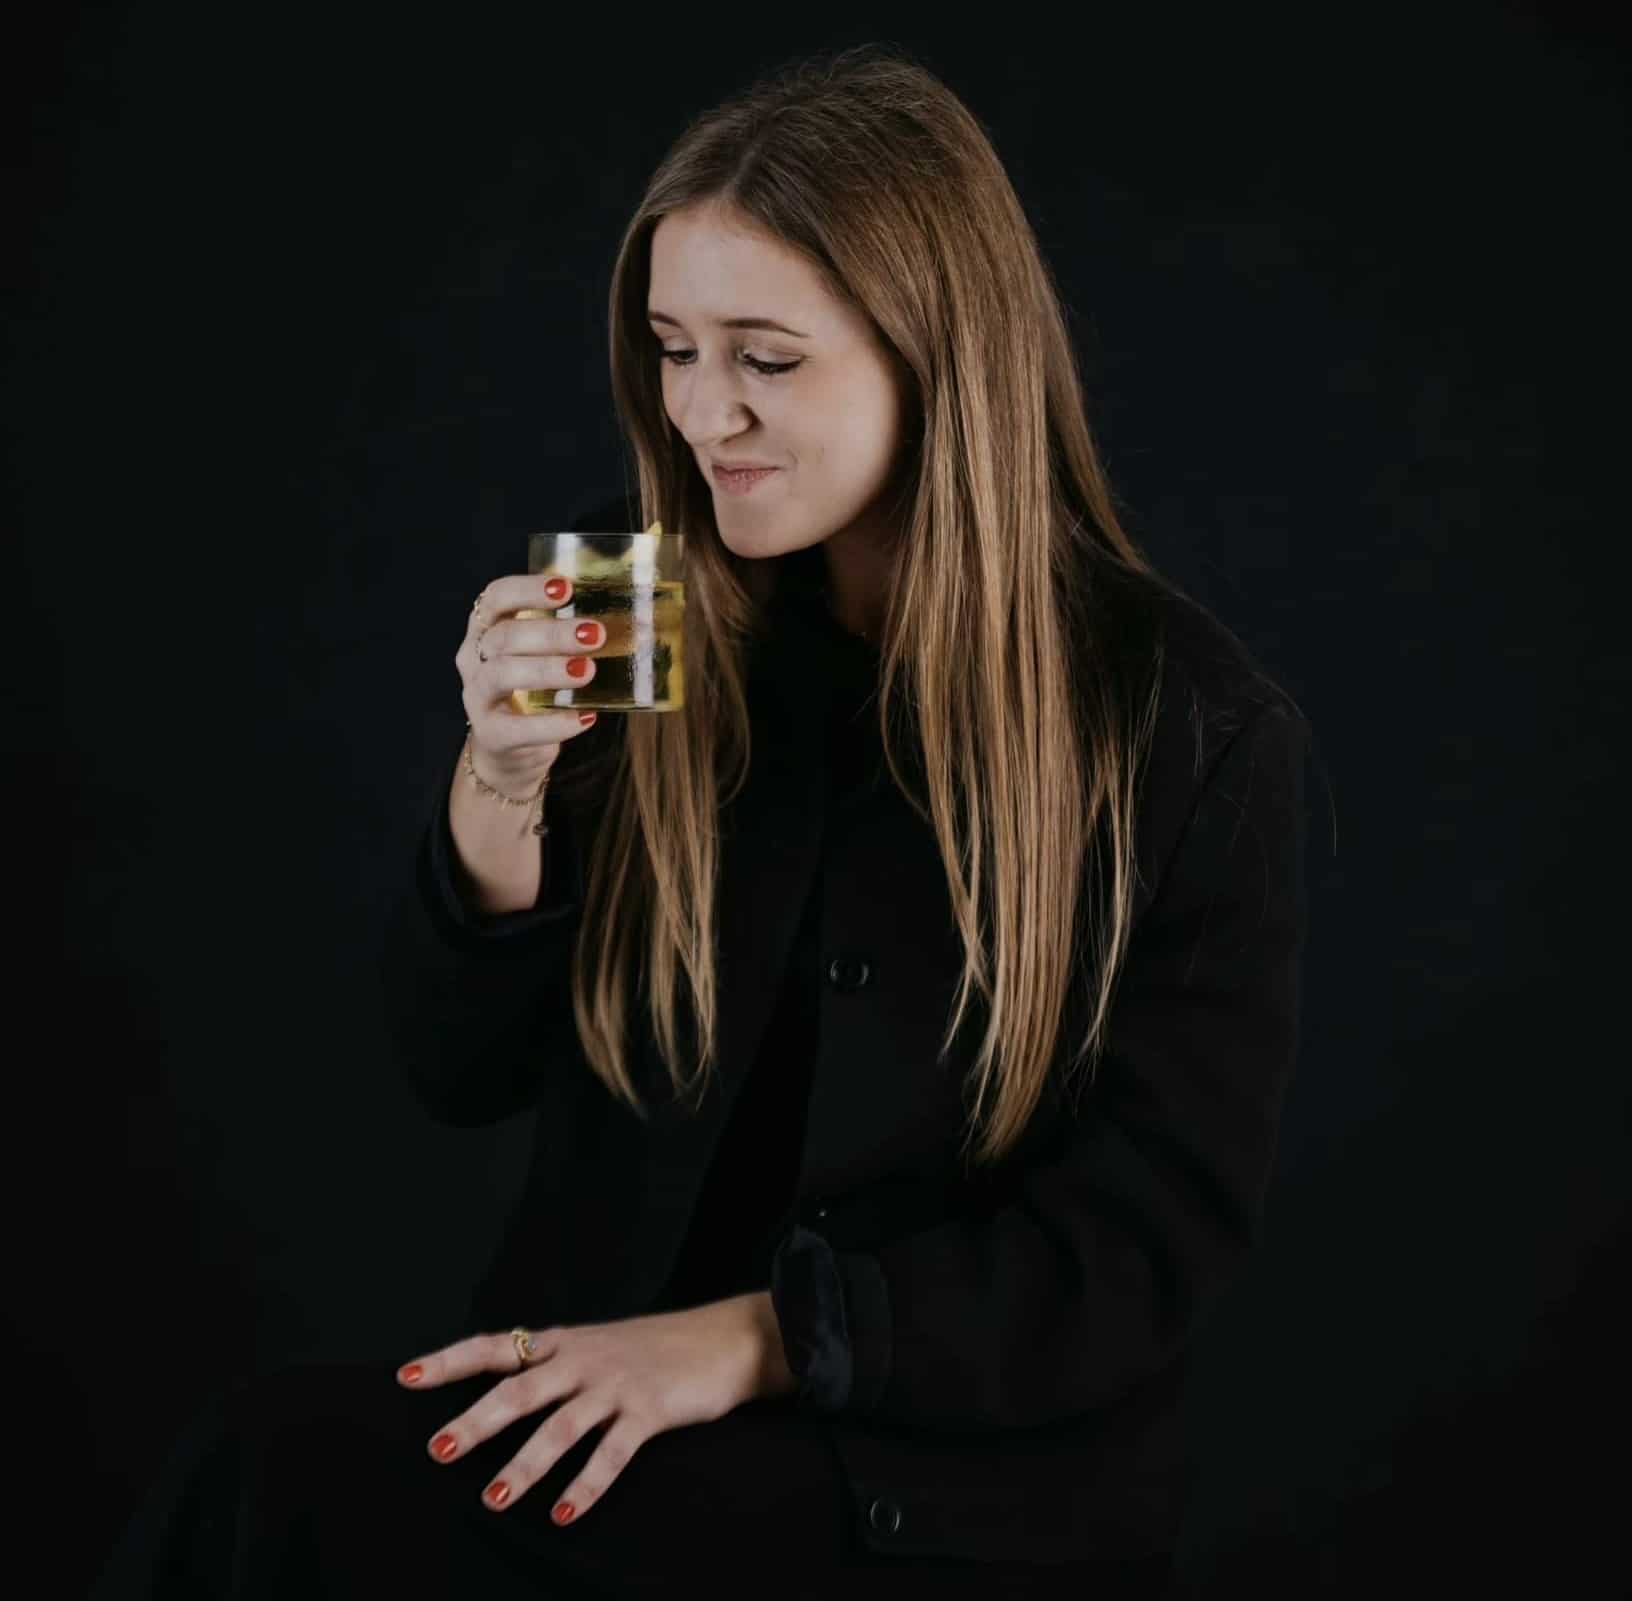 Tanne from Gedulgt sipping her favorite cocktail